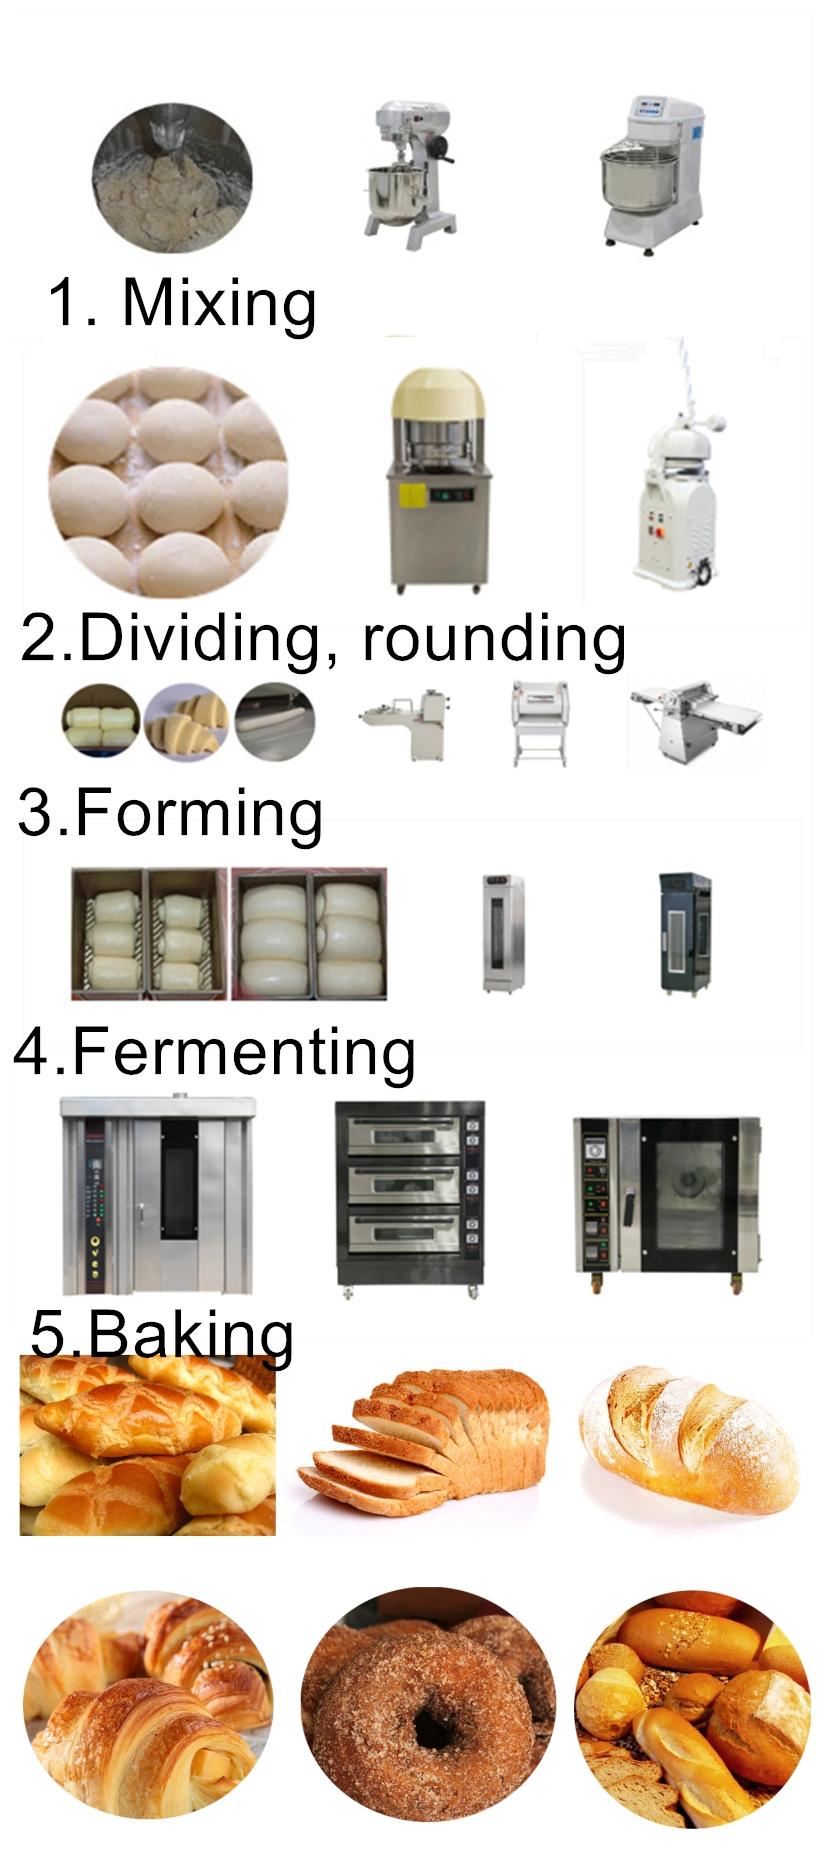 Commercial Electric Spray Convection Oven Pizza Oven Tunnel Oven Pizza Baking Oven Gas Bread Maker Rotary Baking Oven Electric Bakery Equipment Machine